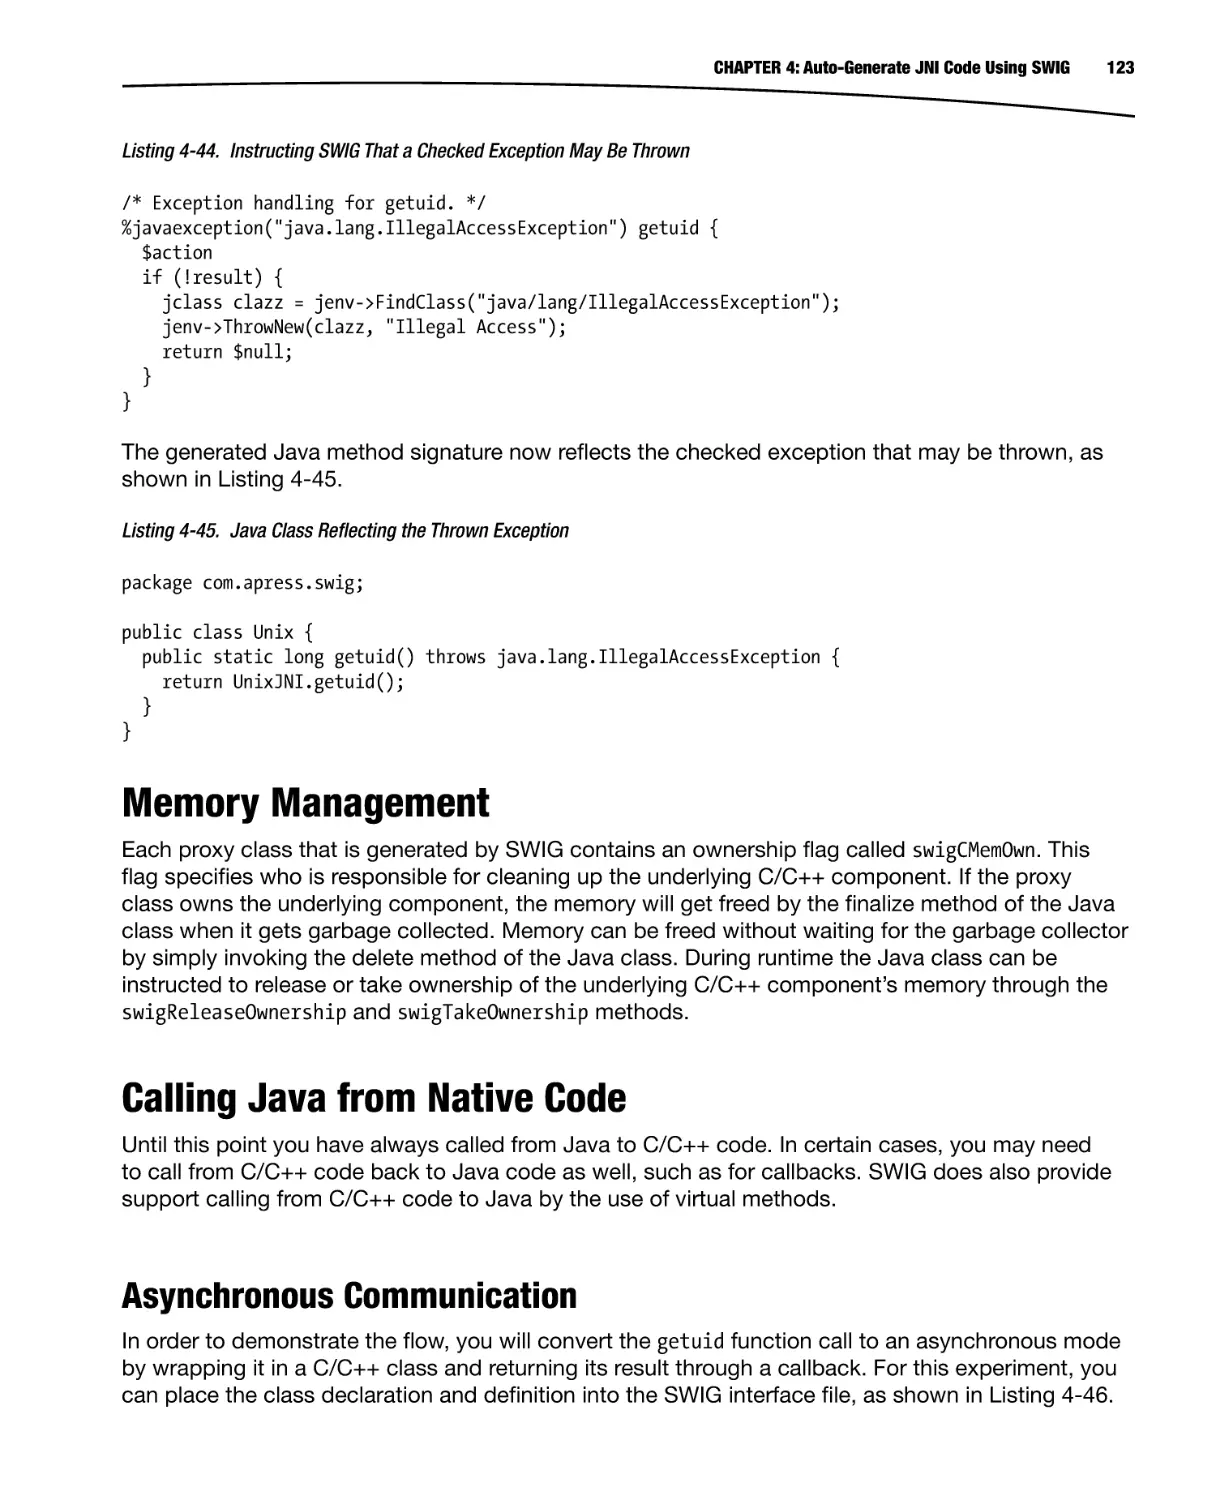 Memory Management
Calling Java from Native Code
Asynchronous Communication